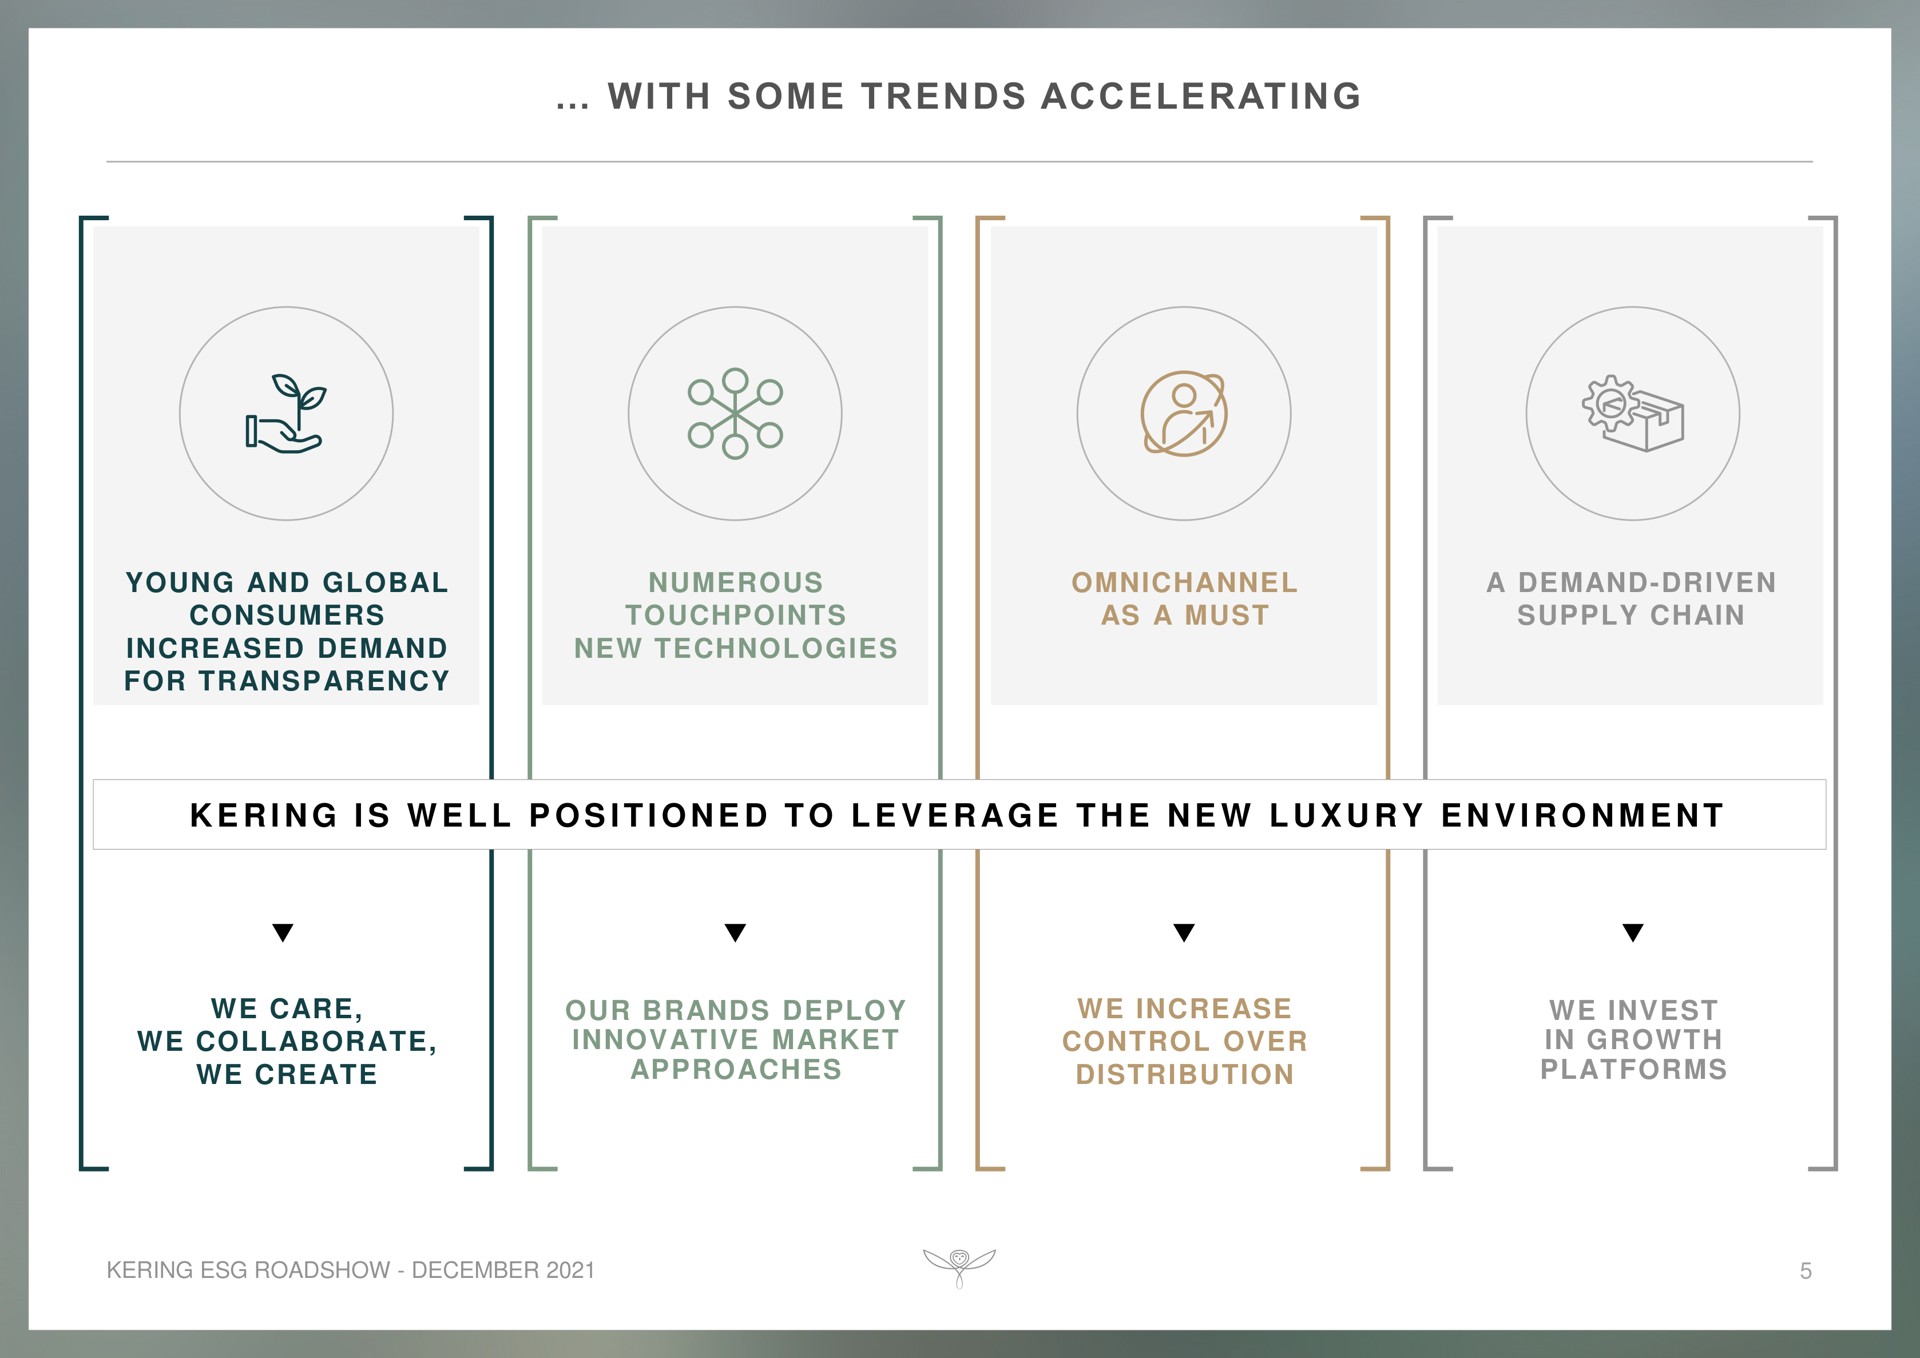 with some trends accelerating our brands deploy innovative market approaches we care we collaborate we create we increase control over distribution we invest in growth platforms | Kering